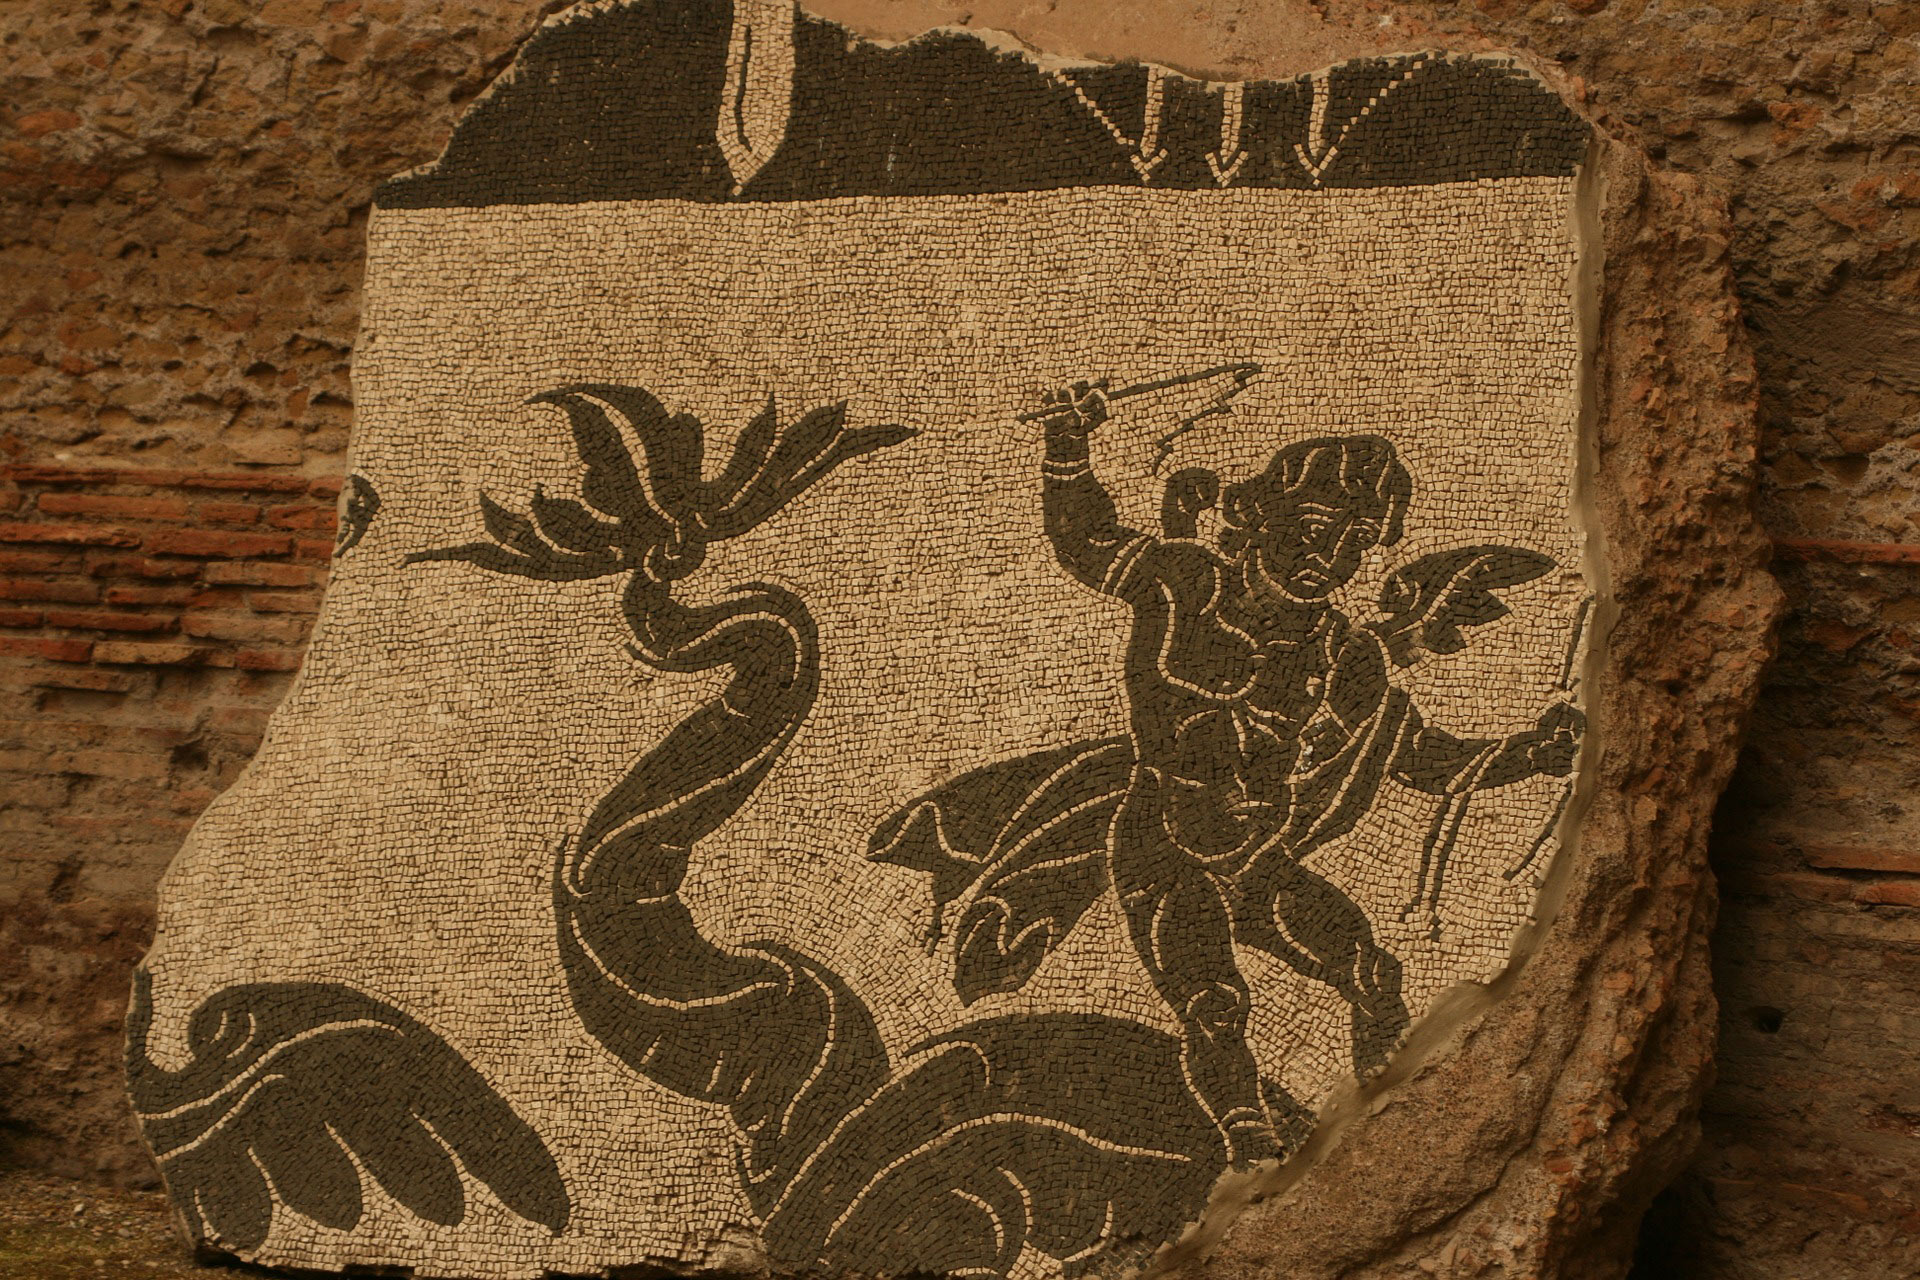 A stone block with mosaic artwork of ancient warrior riding a mythical beast